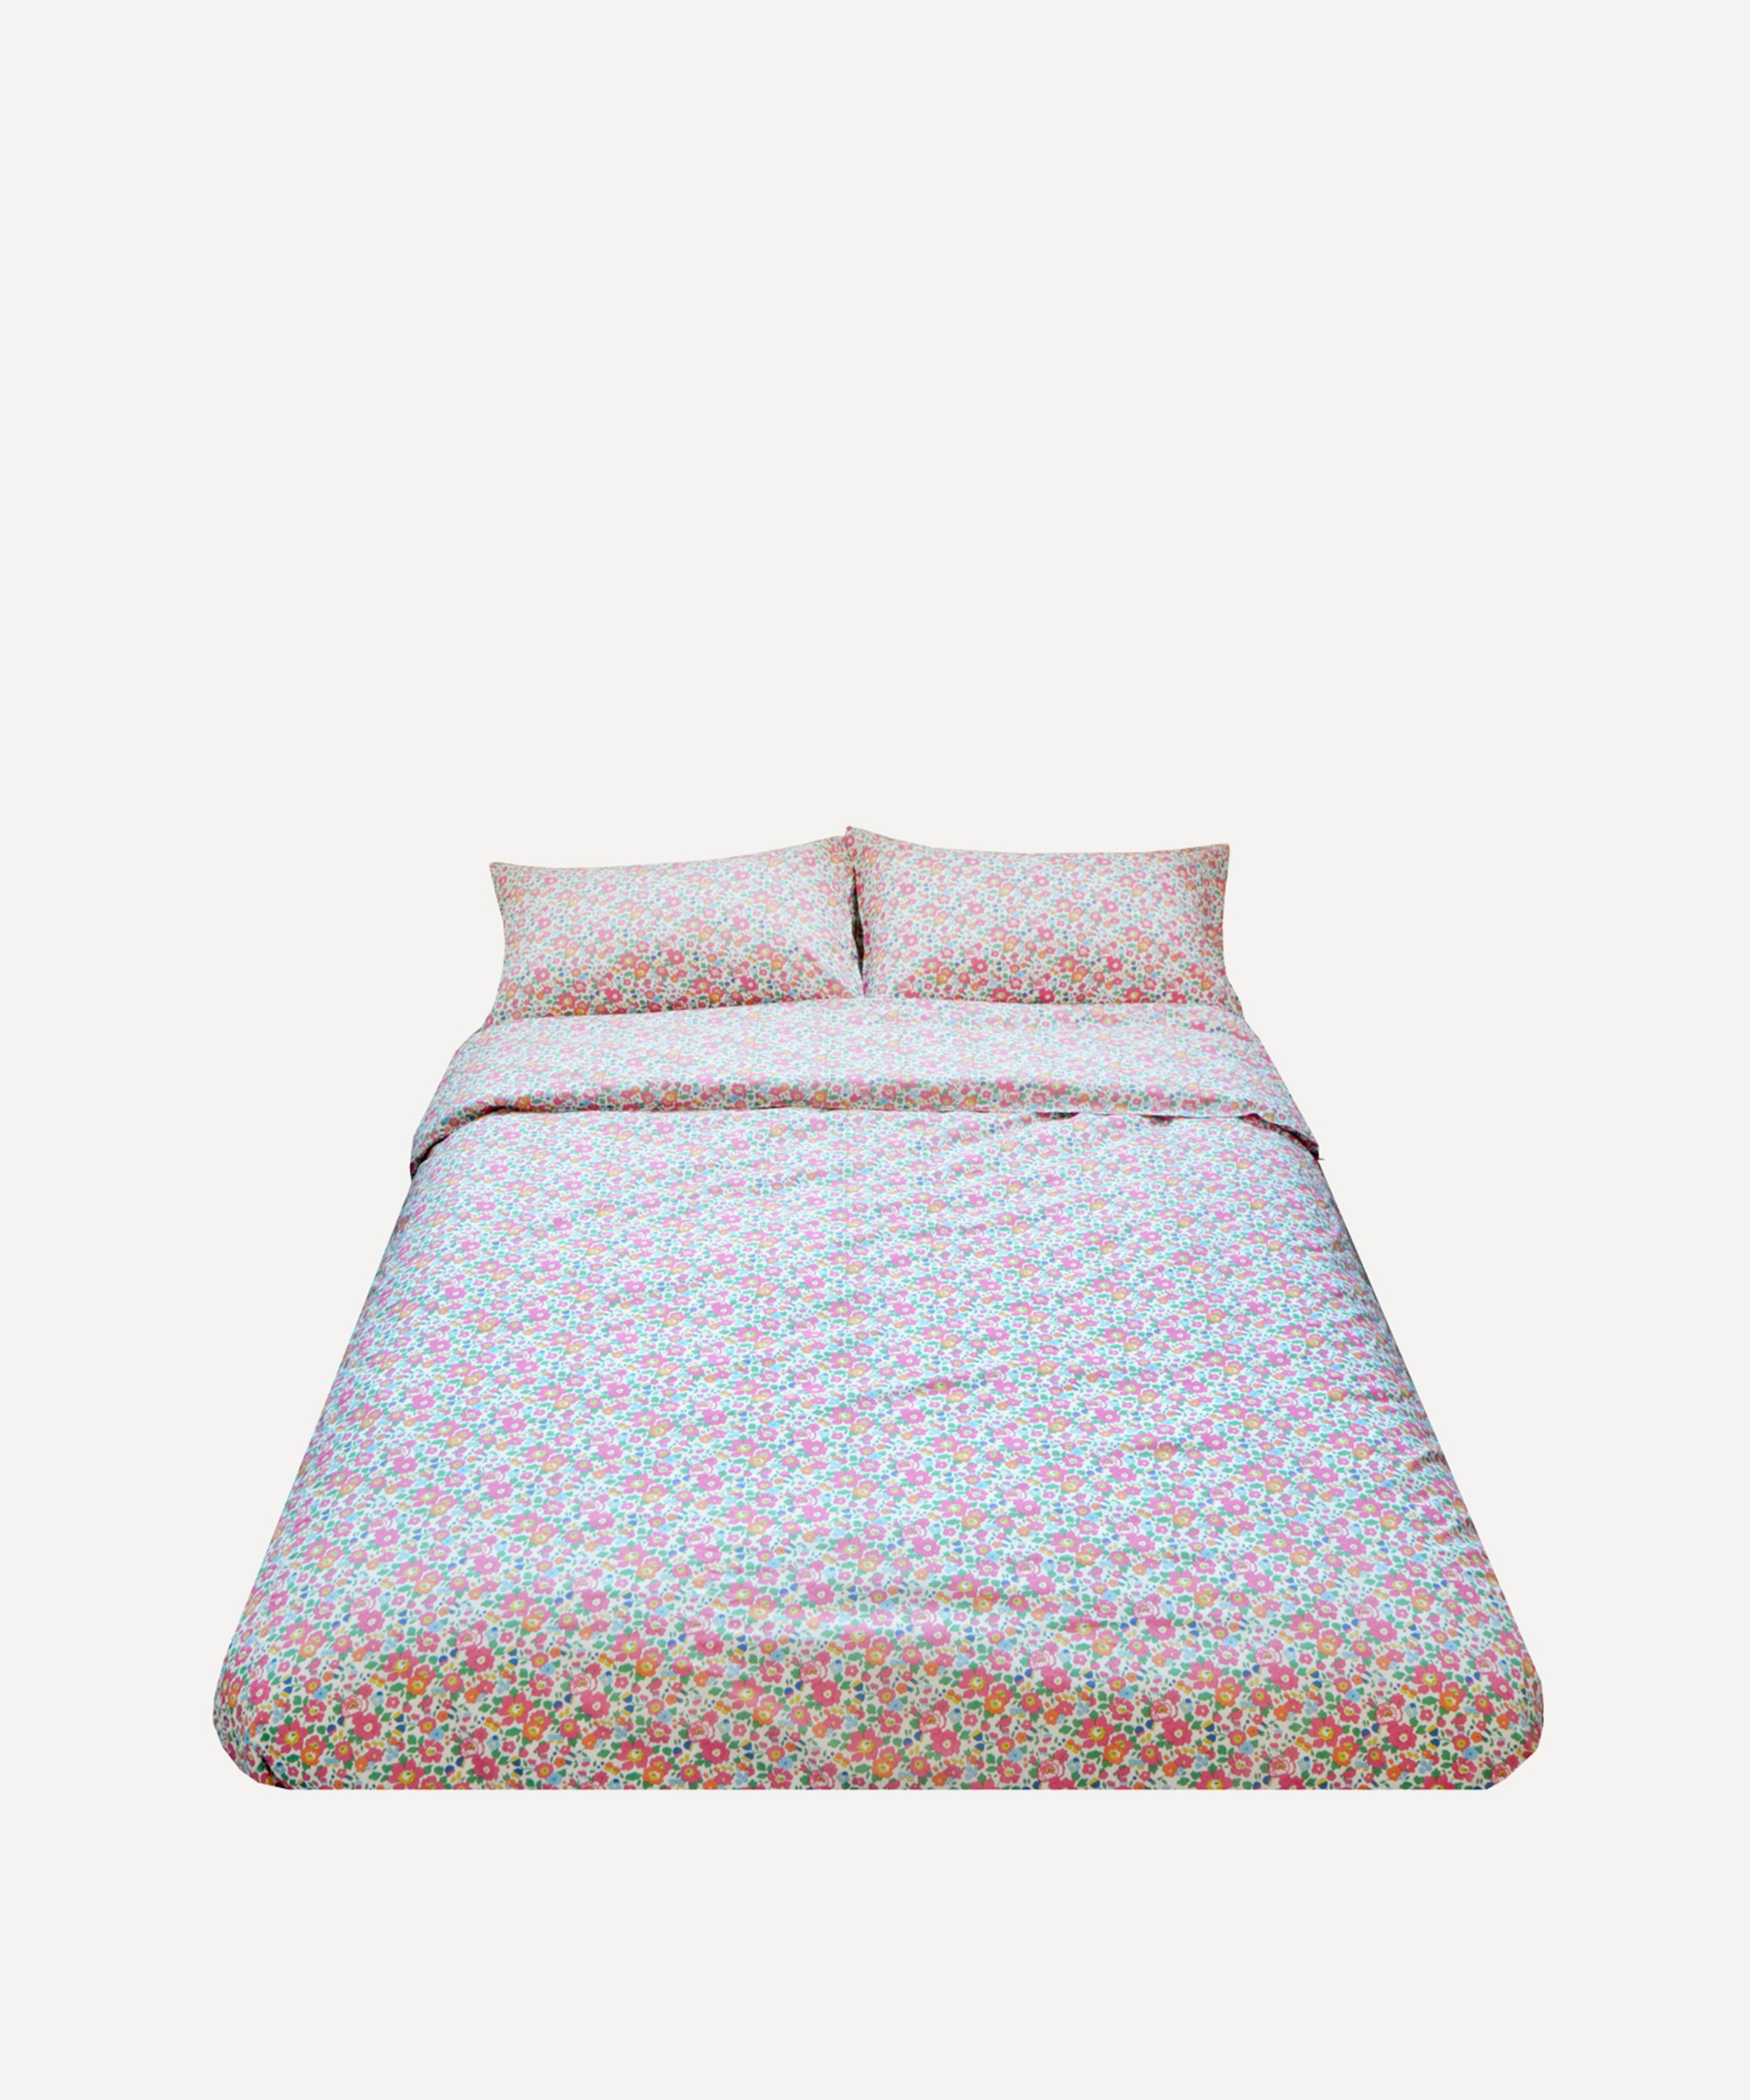 Coco & Wolf - Betsy Deep Pink Double Duvet Cover Set image number 0